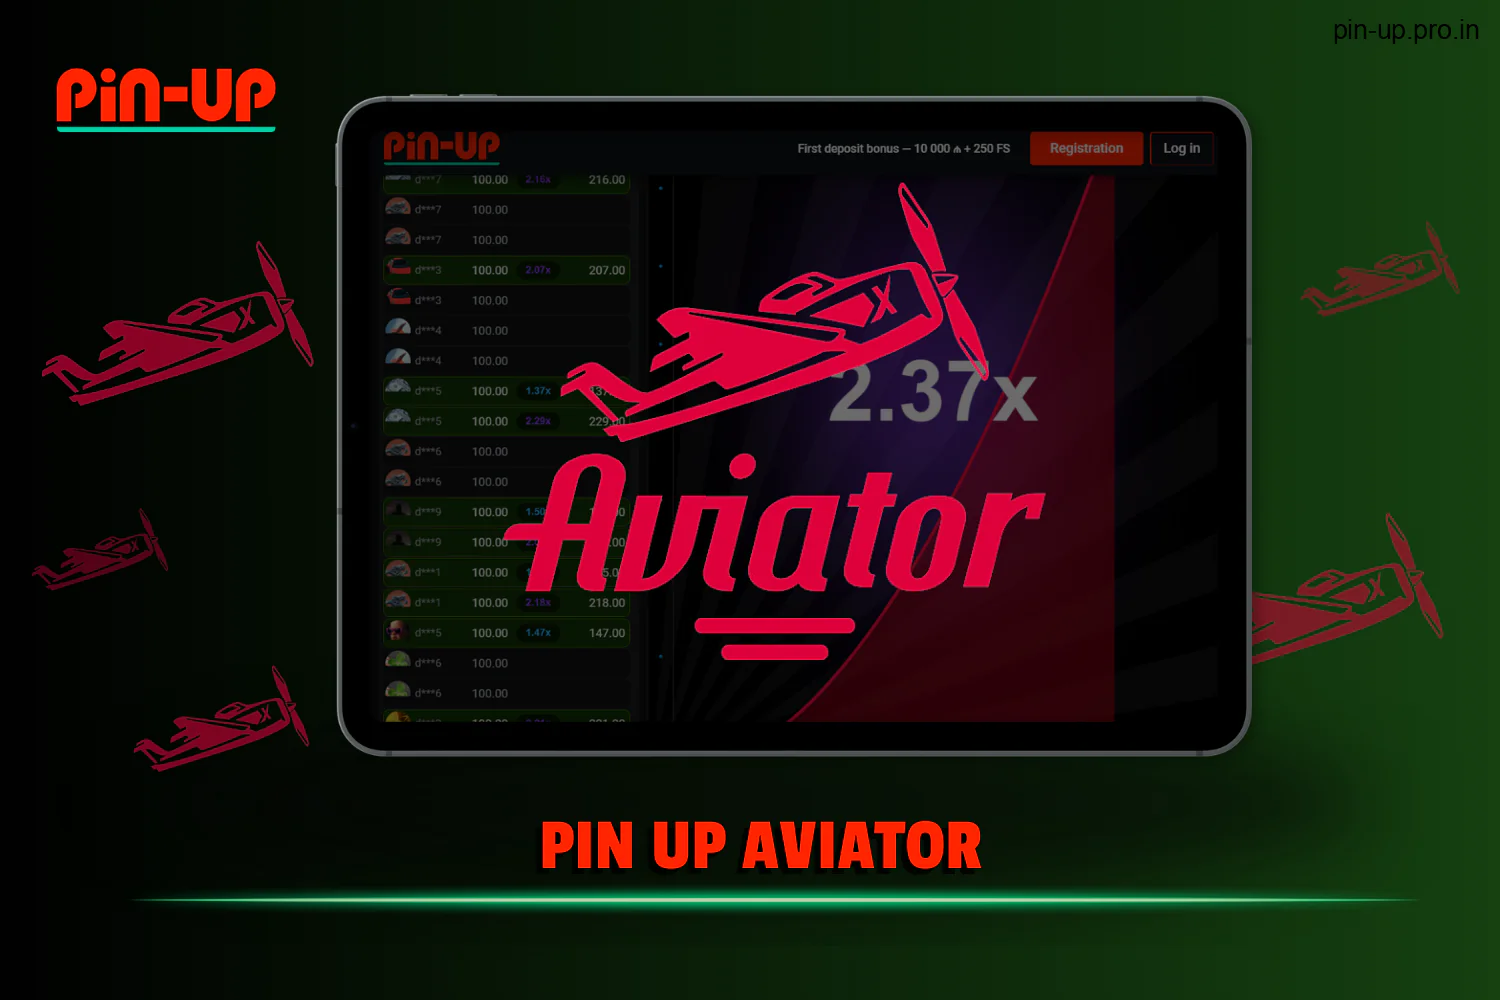 PinUp Aviator is a modern survival game for Indian users with automatic bets and interesting pool mechanics